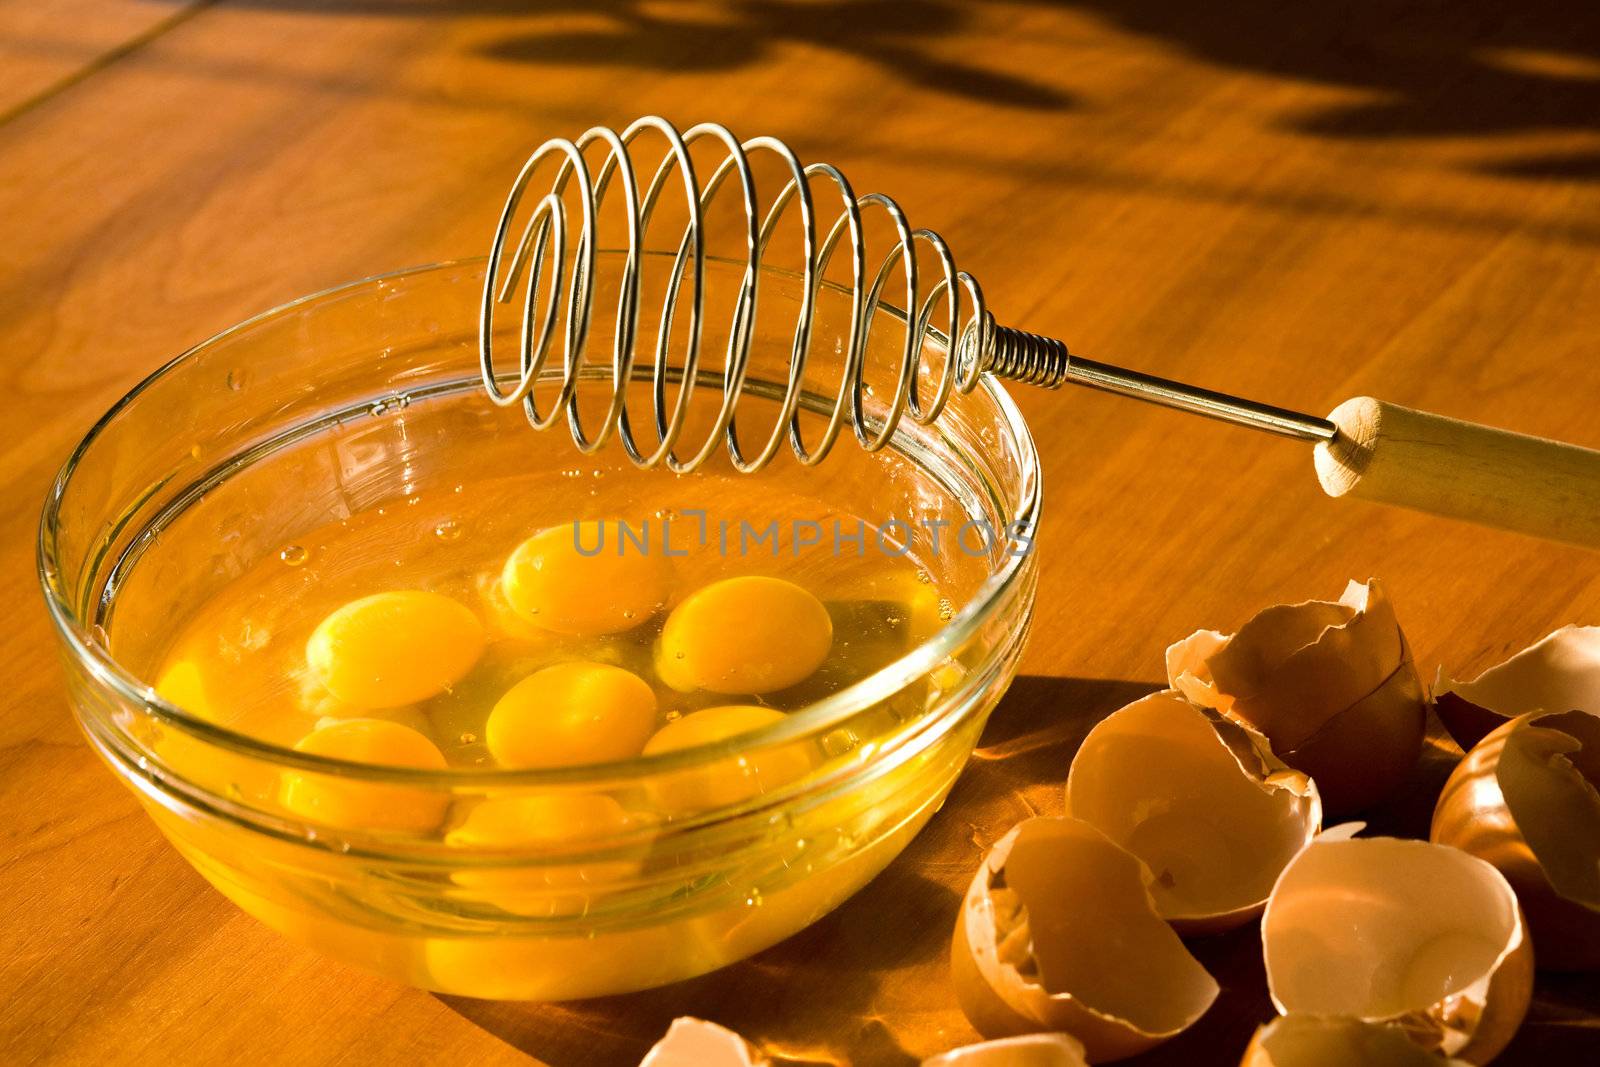 A glass plateful of eggs while an omelette preparing

